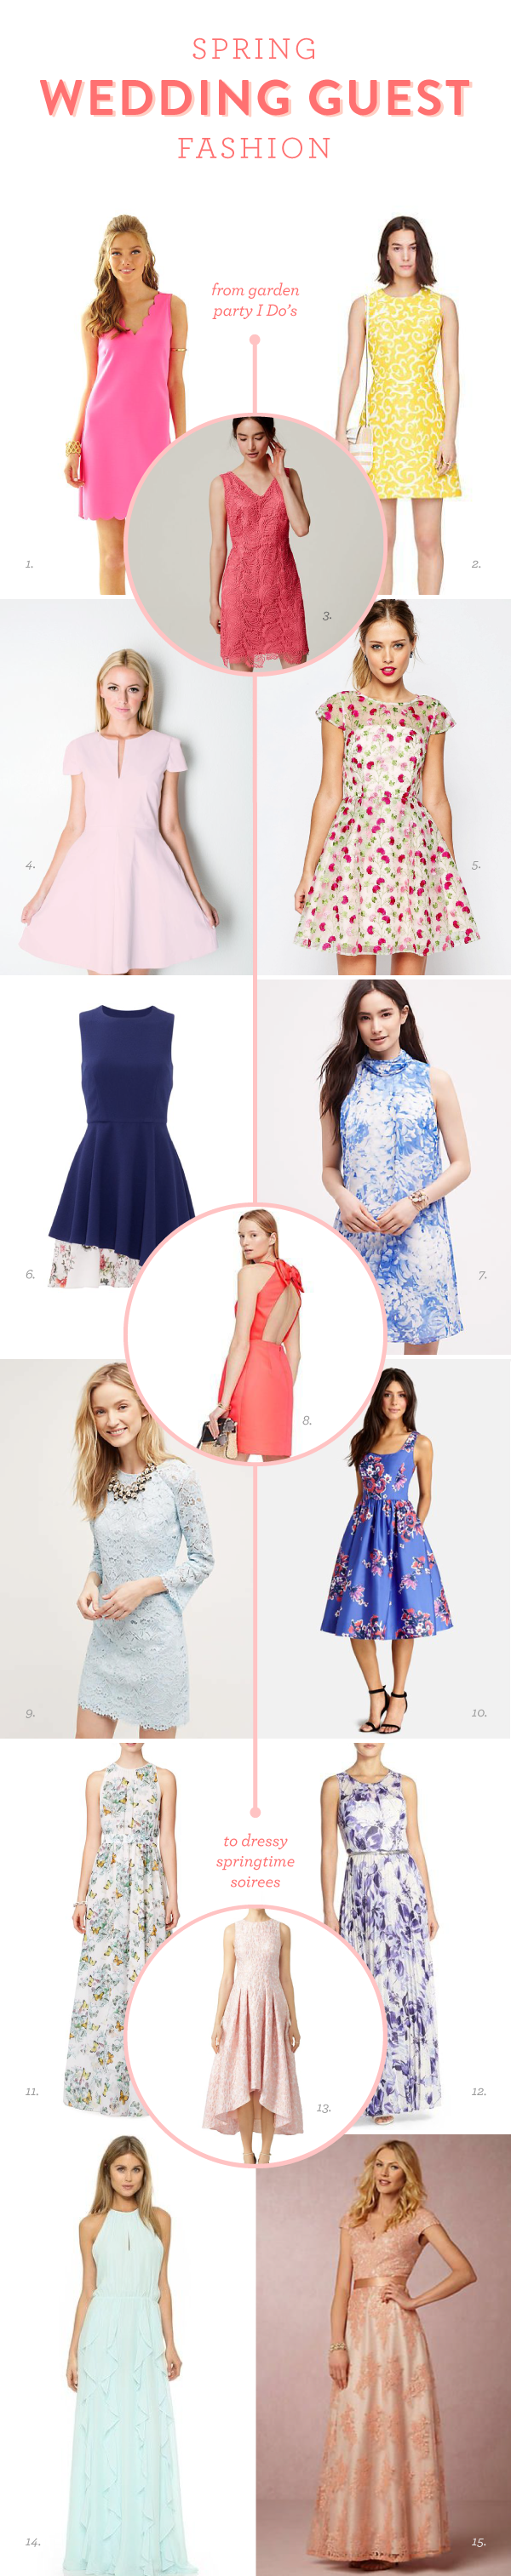 spring wedding guest dresses Archives - Southern Weddings